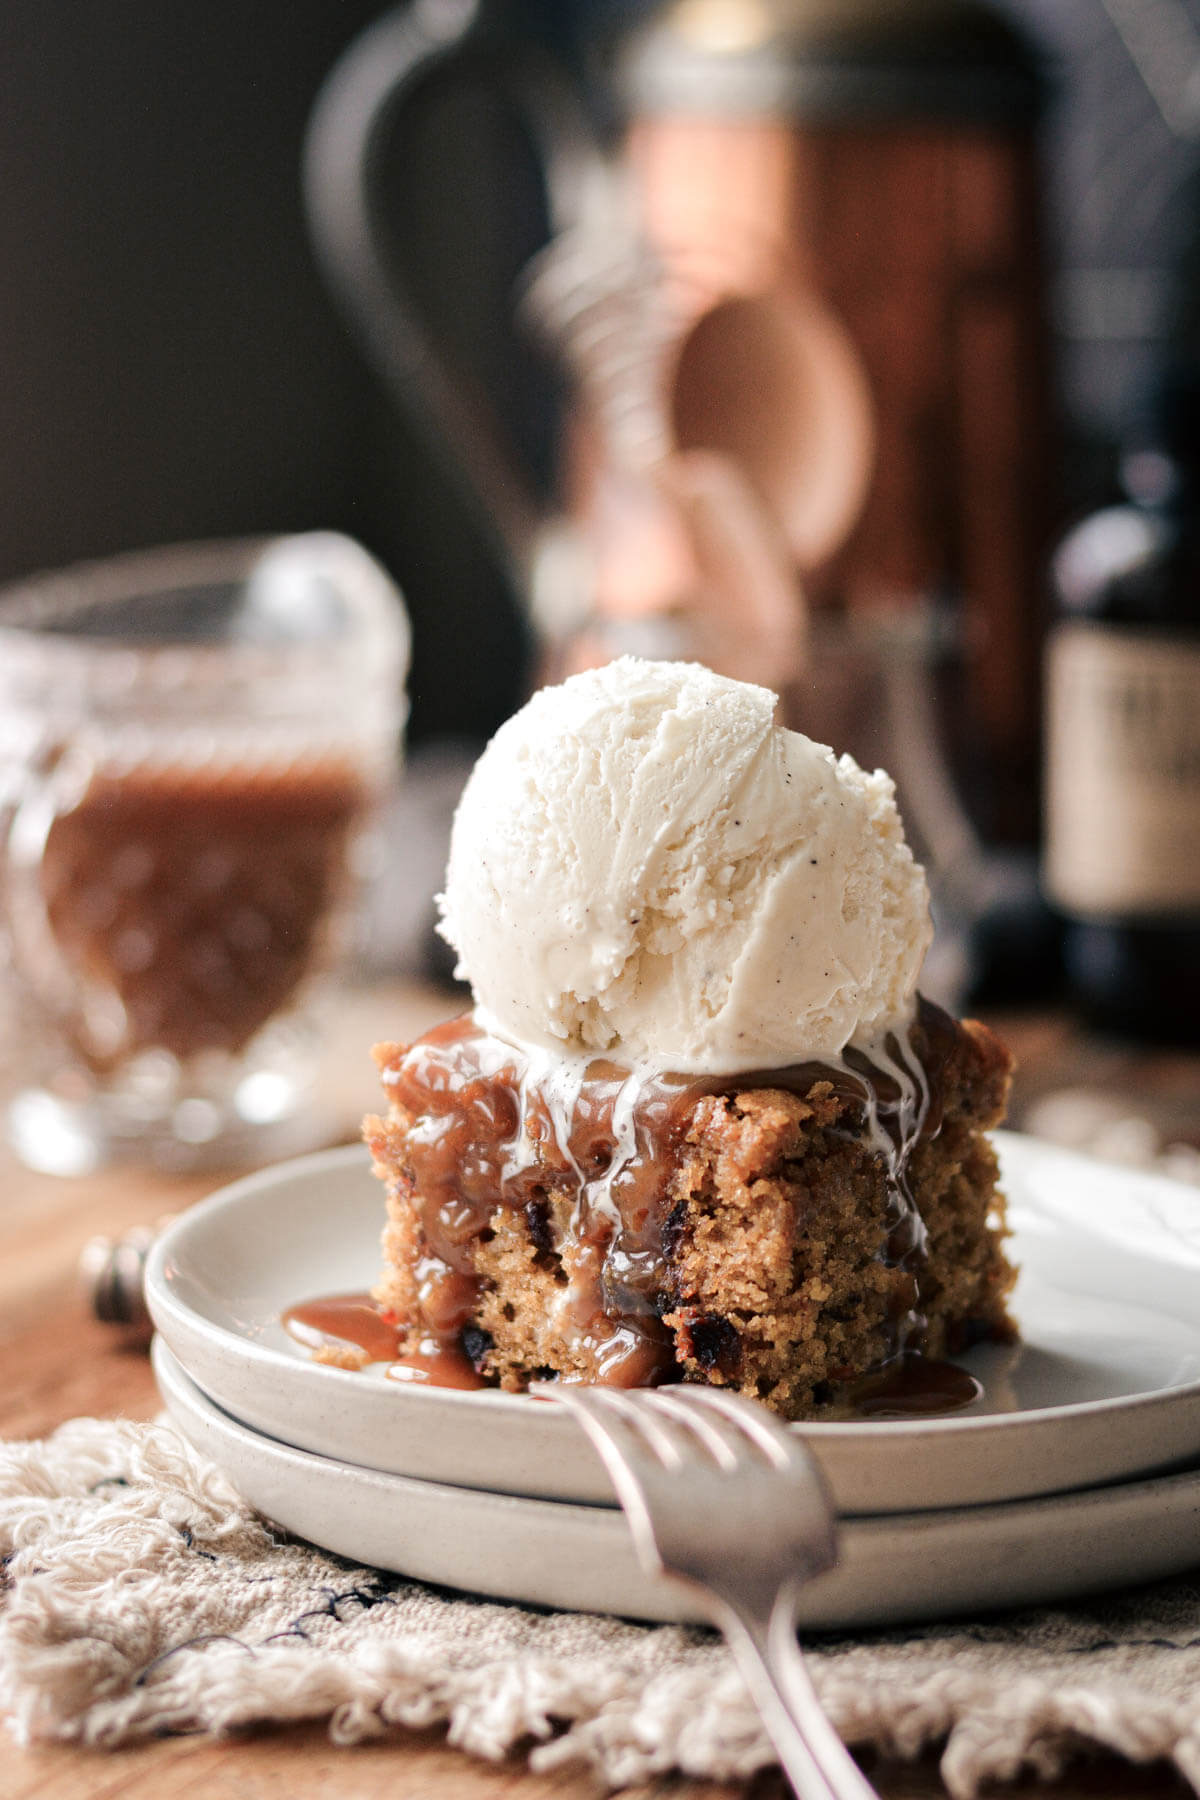 Sticky toffee pudding topped with toffee sauce and vanilla ice cream.